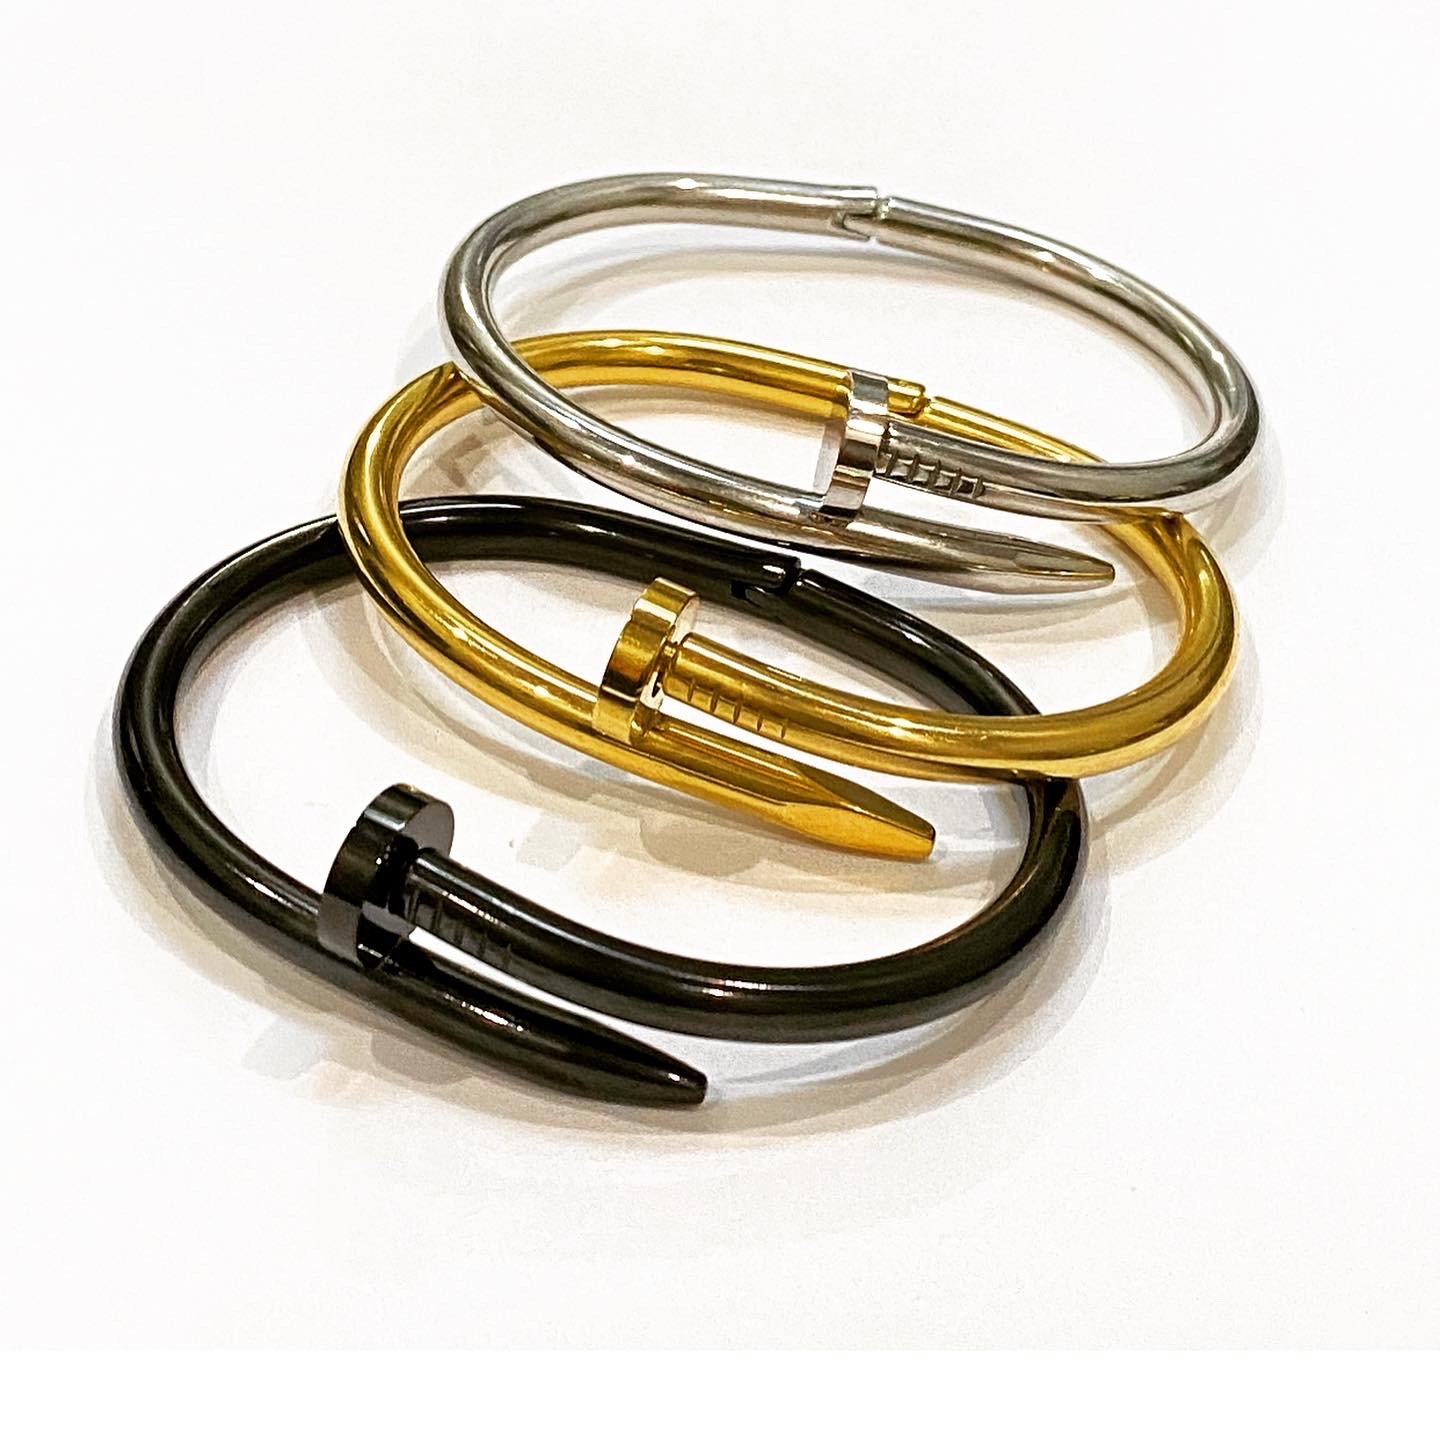 Nail bangle Bracelet Gold Plated Stainless Steel bracelet for Women with  gift box - Walmart.com